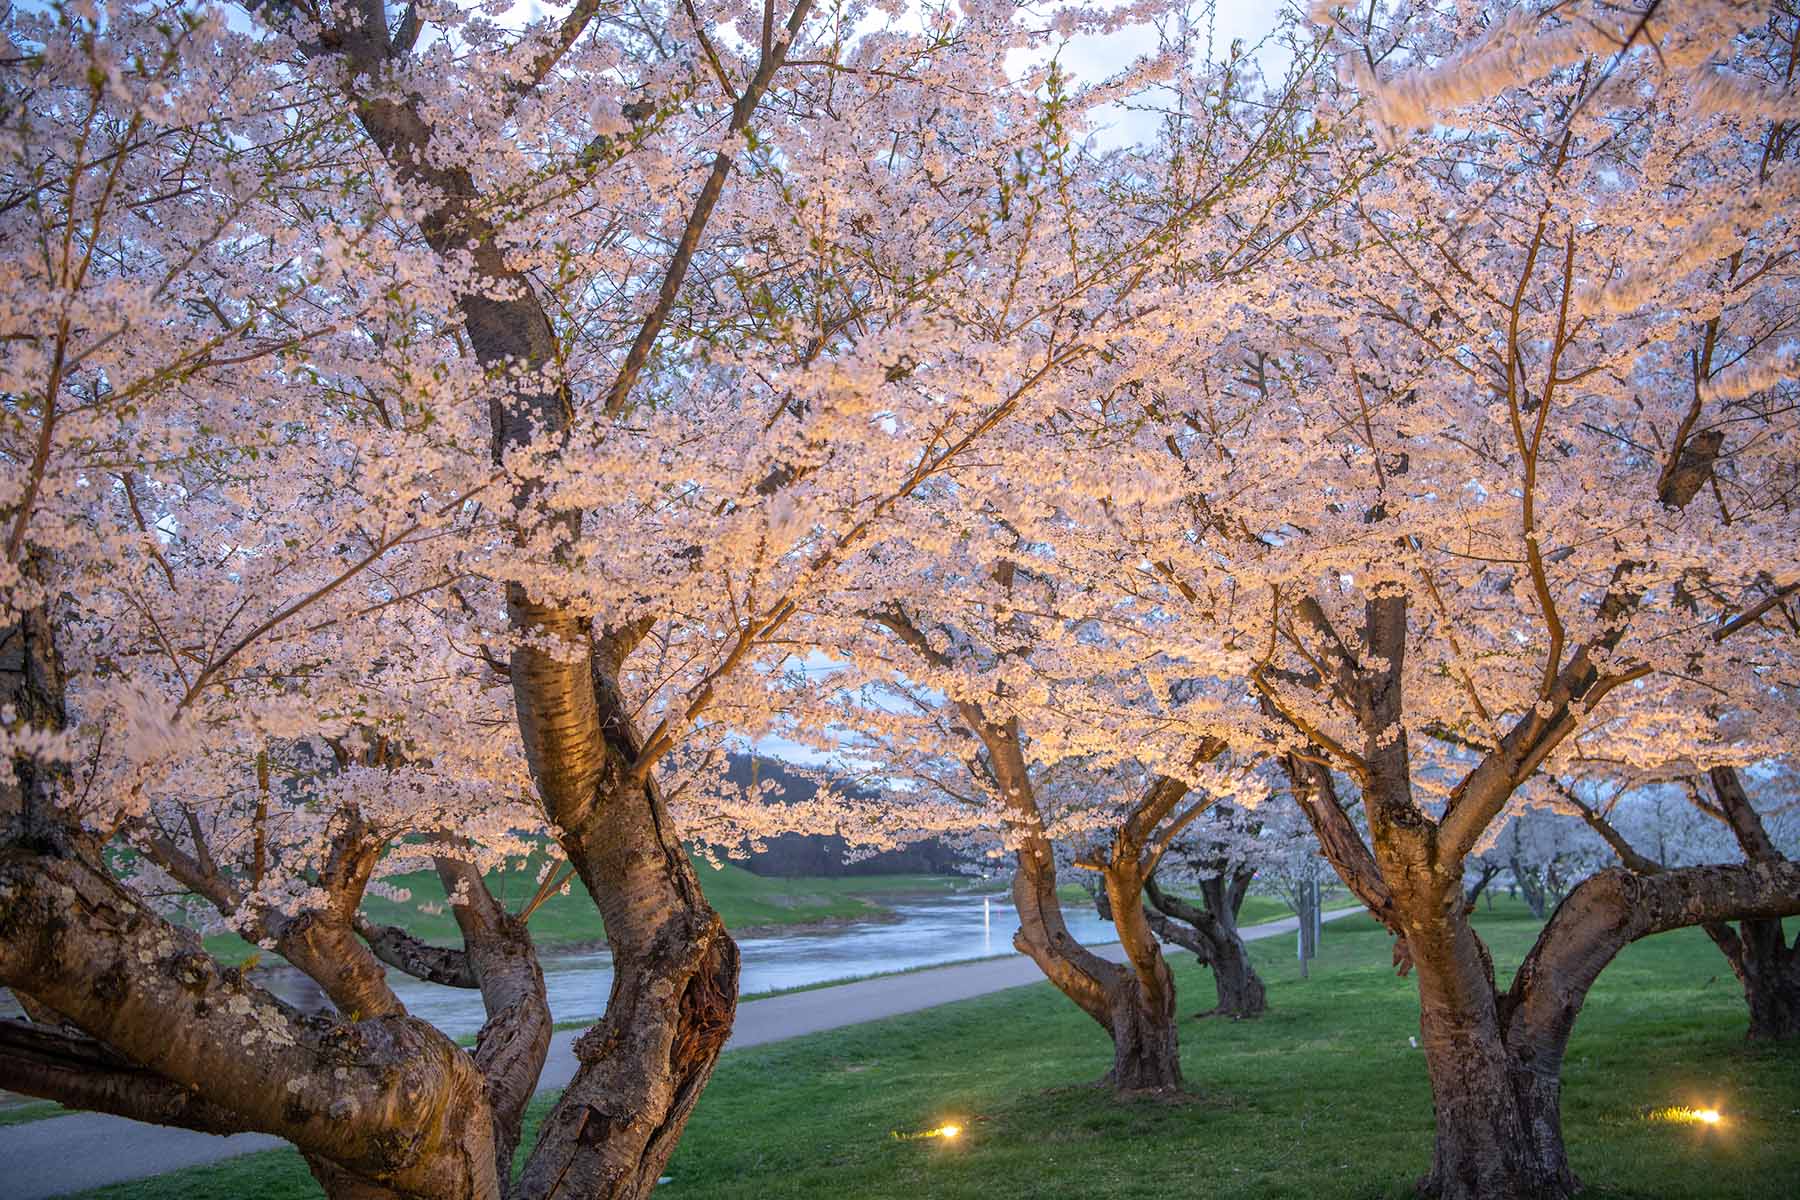 Lighted cherry blossom trees along the Athens campus bike path